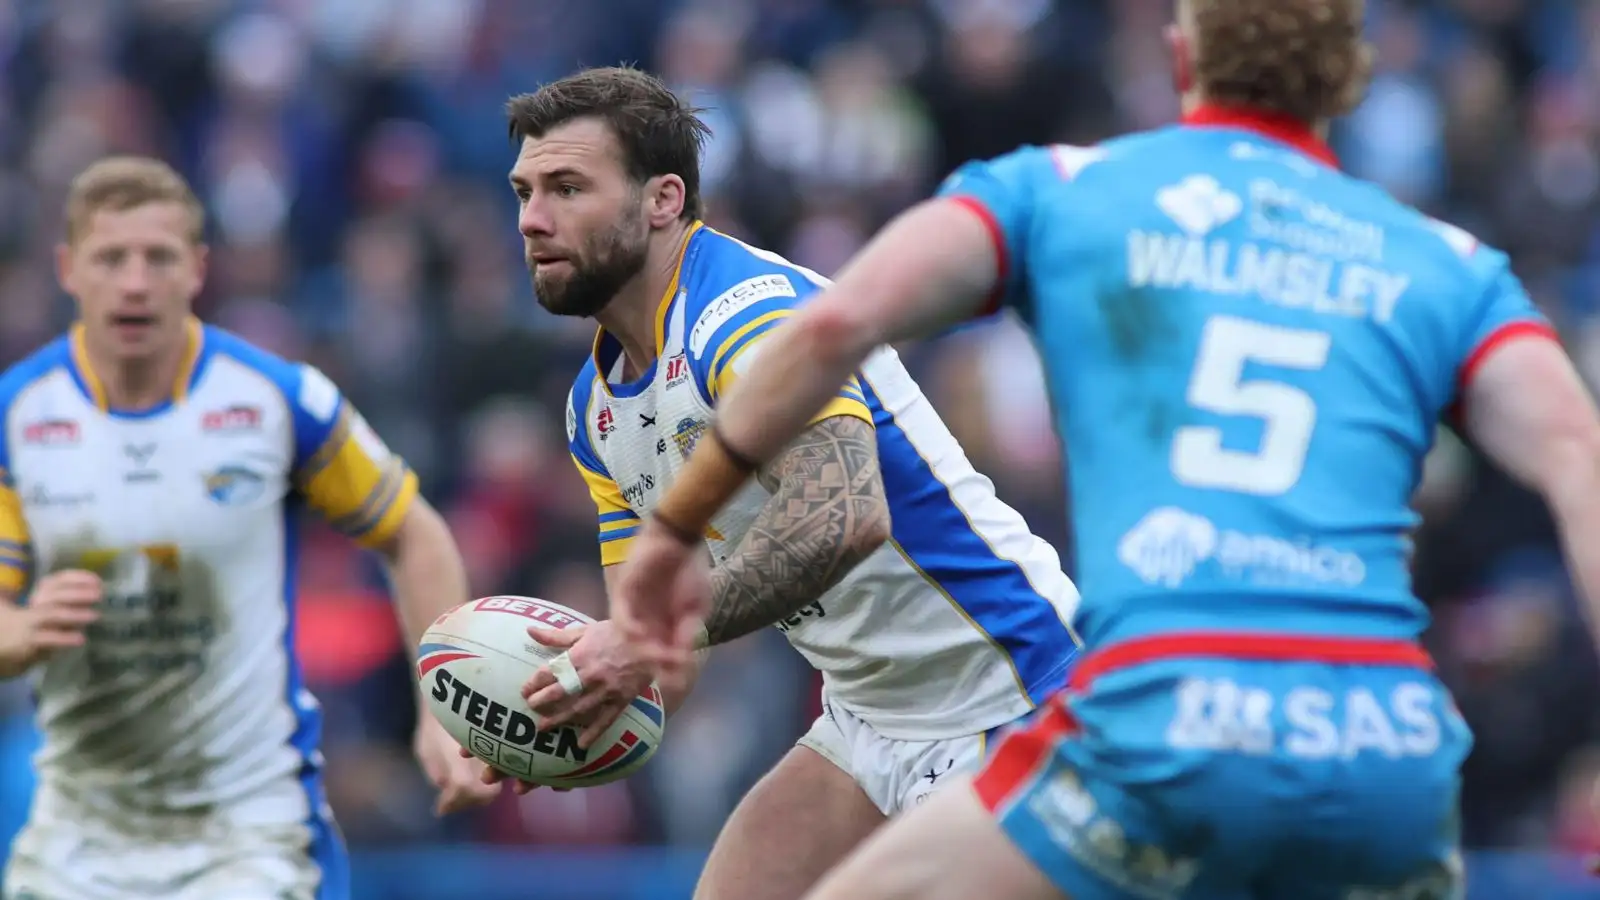 Boxing Day round-up: Leeds Rhinos come from behind to beat Wakefield Trinity & Sean Long’s perfect start at Oldham